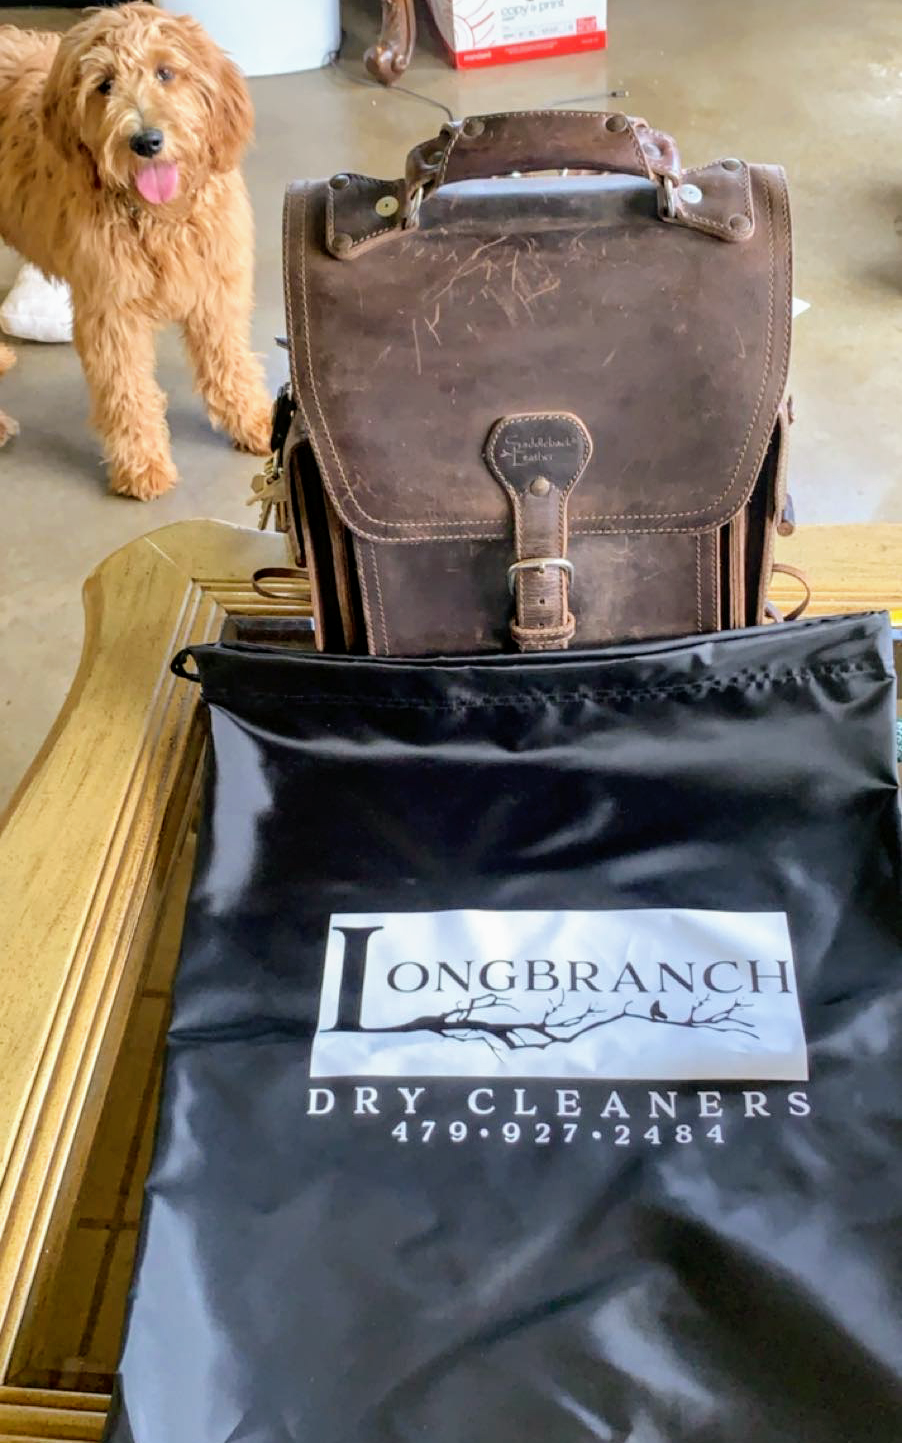 Longbranch Dry Cleaners